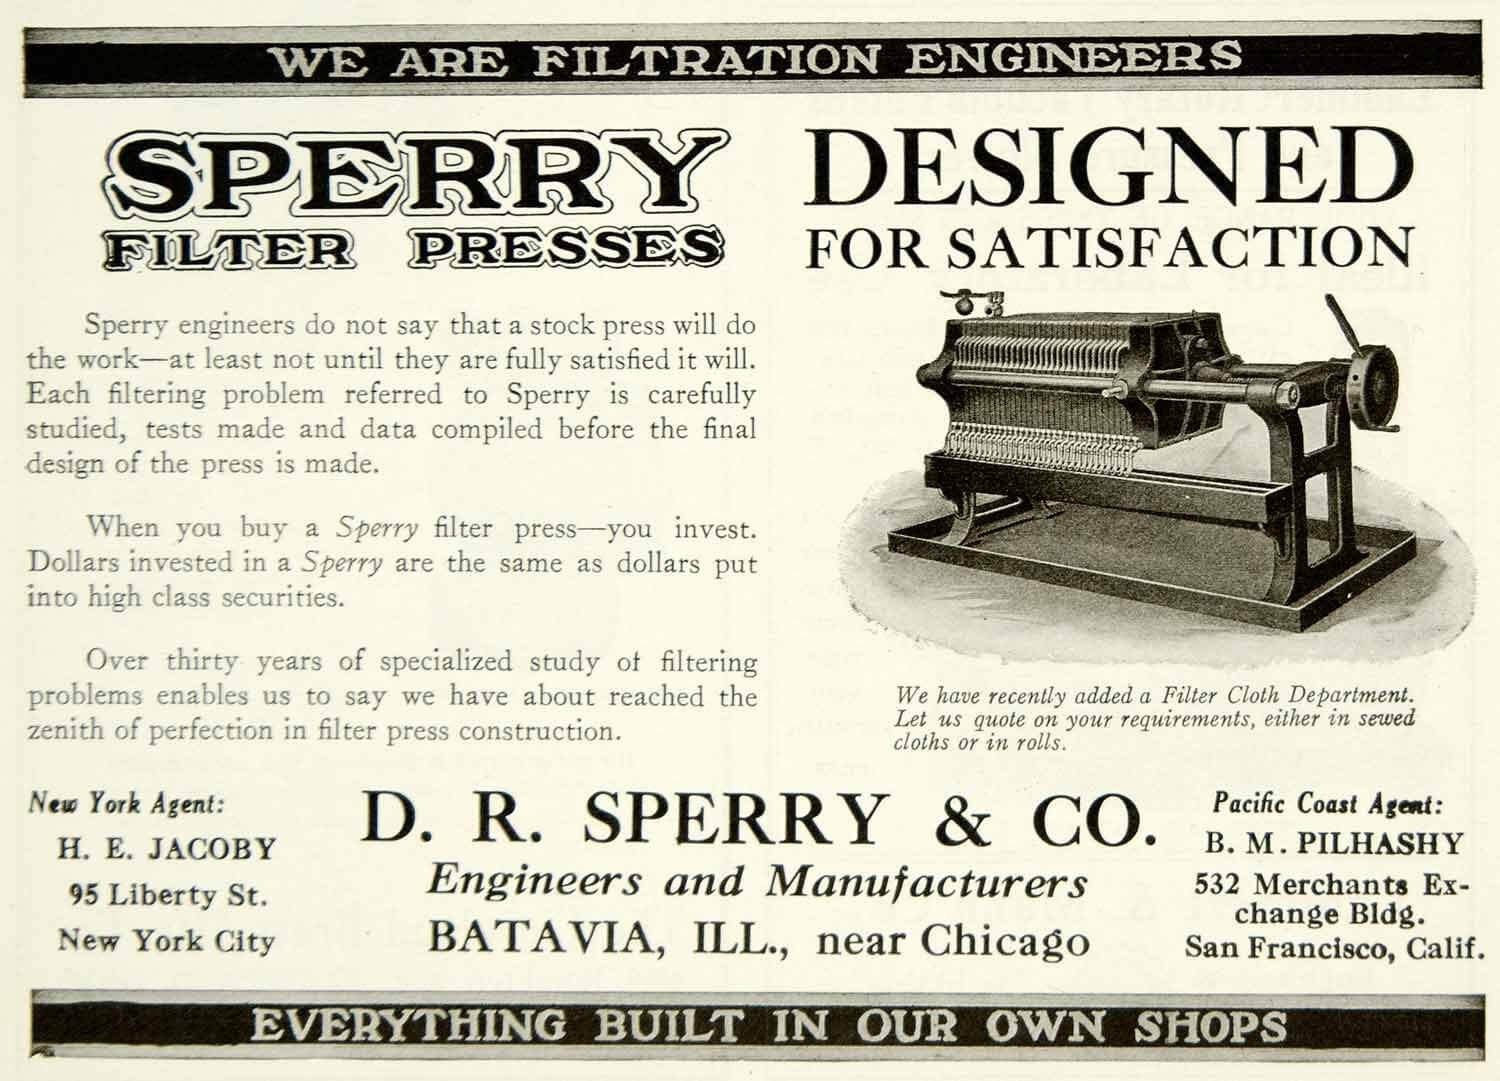 Sperry engineers do not say that a stock press will do the work—at least not until they are fully satisfied it will. Each filtering problem referred to Sperry is carefully studied, tests made and data compiled before the final design of the press is made. When you buy a Sperry filter press-you invest. Dollars invested in a Sperry are the same as dollars put into high class securities. Over thirty years of specialized study of filtering problems enables us to say we have about reached the zenith of perfection in filter press construction.  D. R. SPERRY & CO. Engineers and Manufacturers BATAVIA, ILL., near Chicago Pacific Coast Agent: B. M. PILHASHY 532 Merchants Exchange Bldg. San Francisco, Calif.